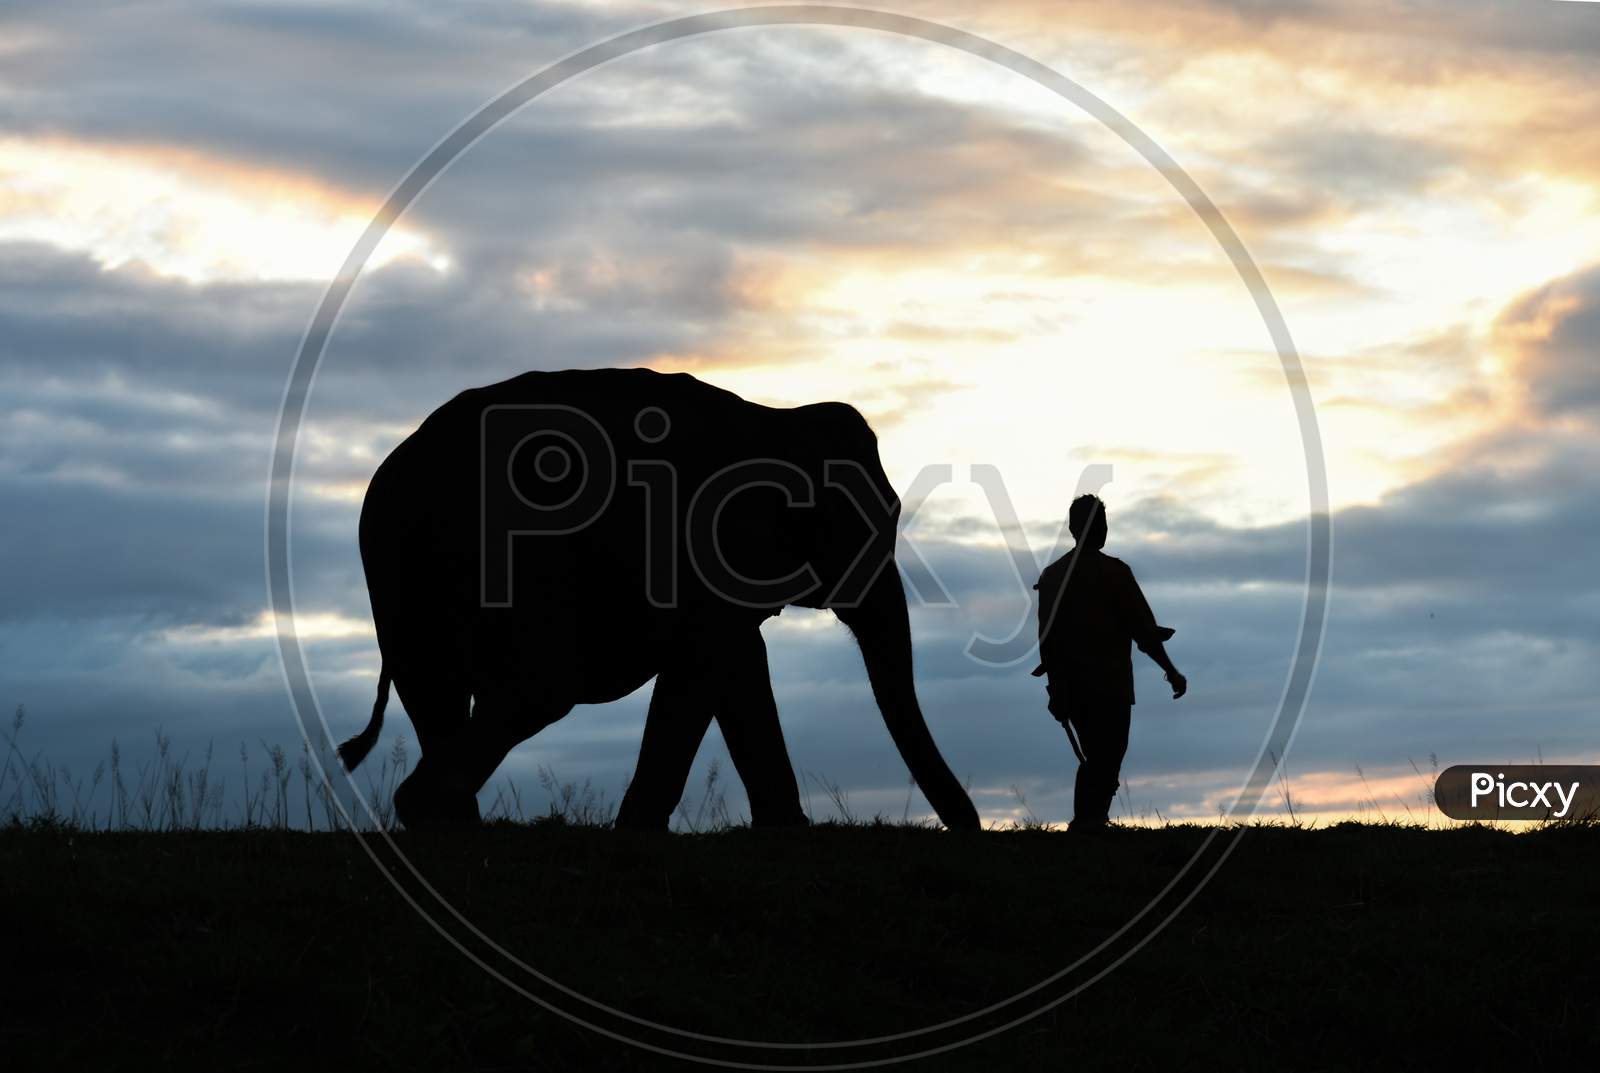 Silhouette Elephant with mahout